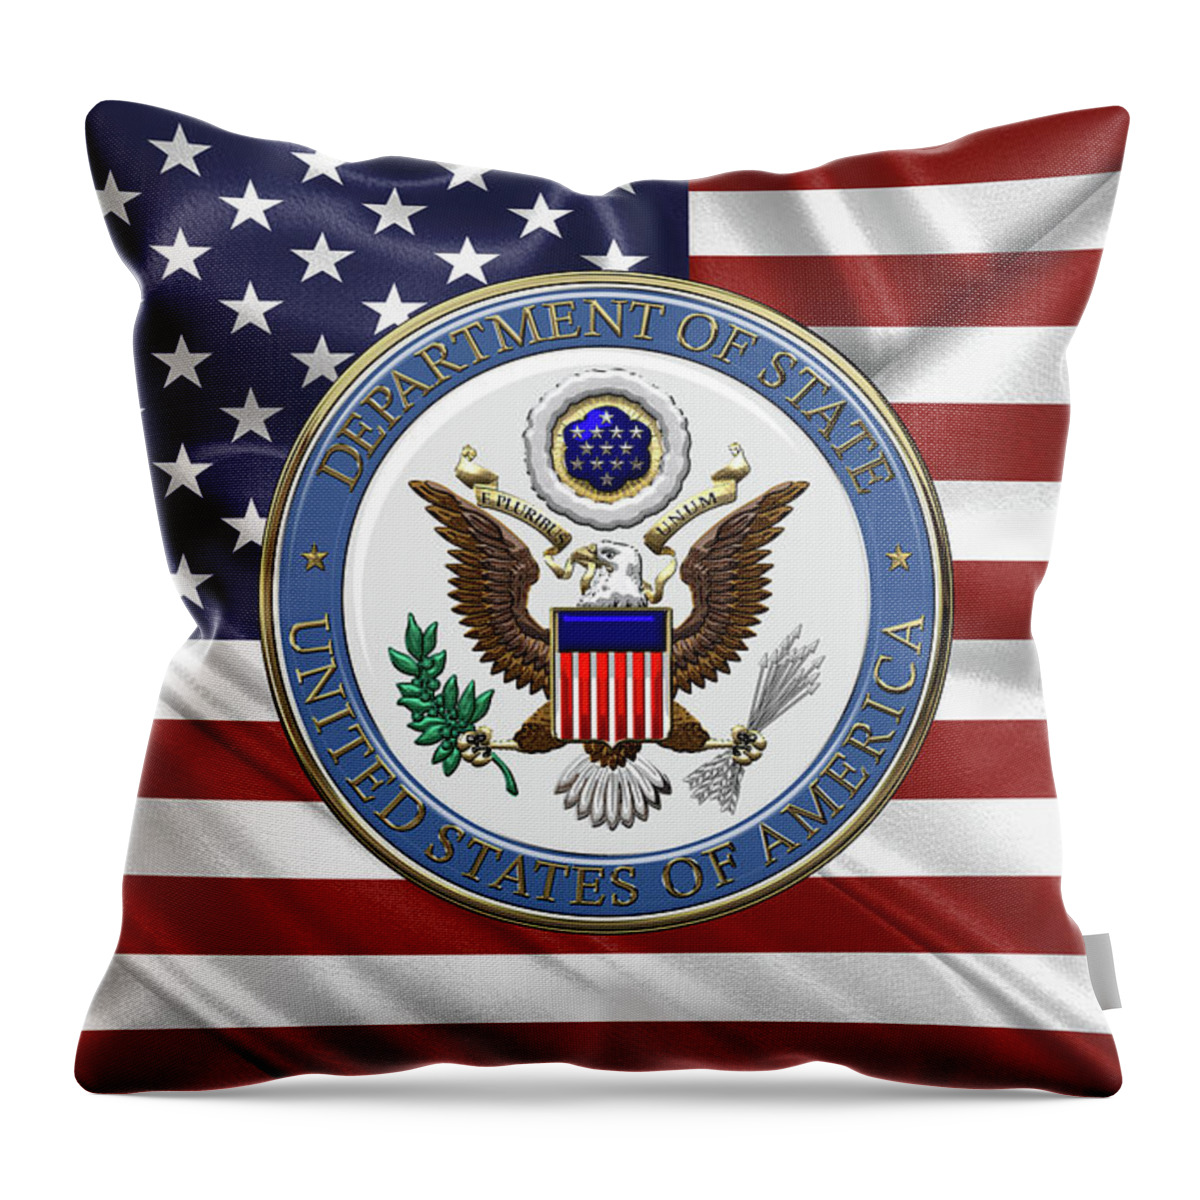 �insignia 3d� By Serge Averbukh Throw Pillow featuring the digital art U. S. Department of State - Emblem over American Flag by Serge Averbukh